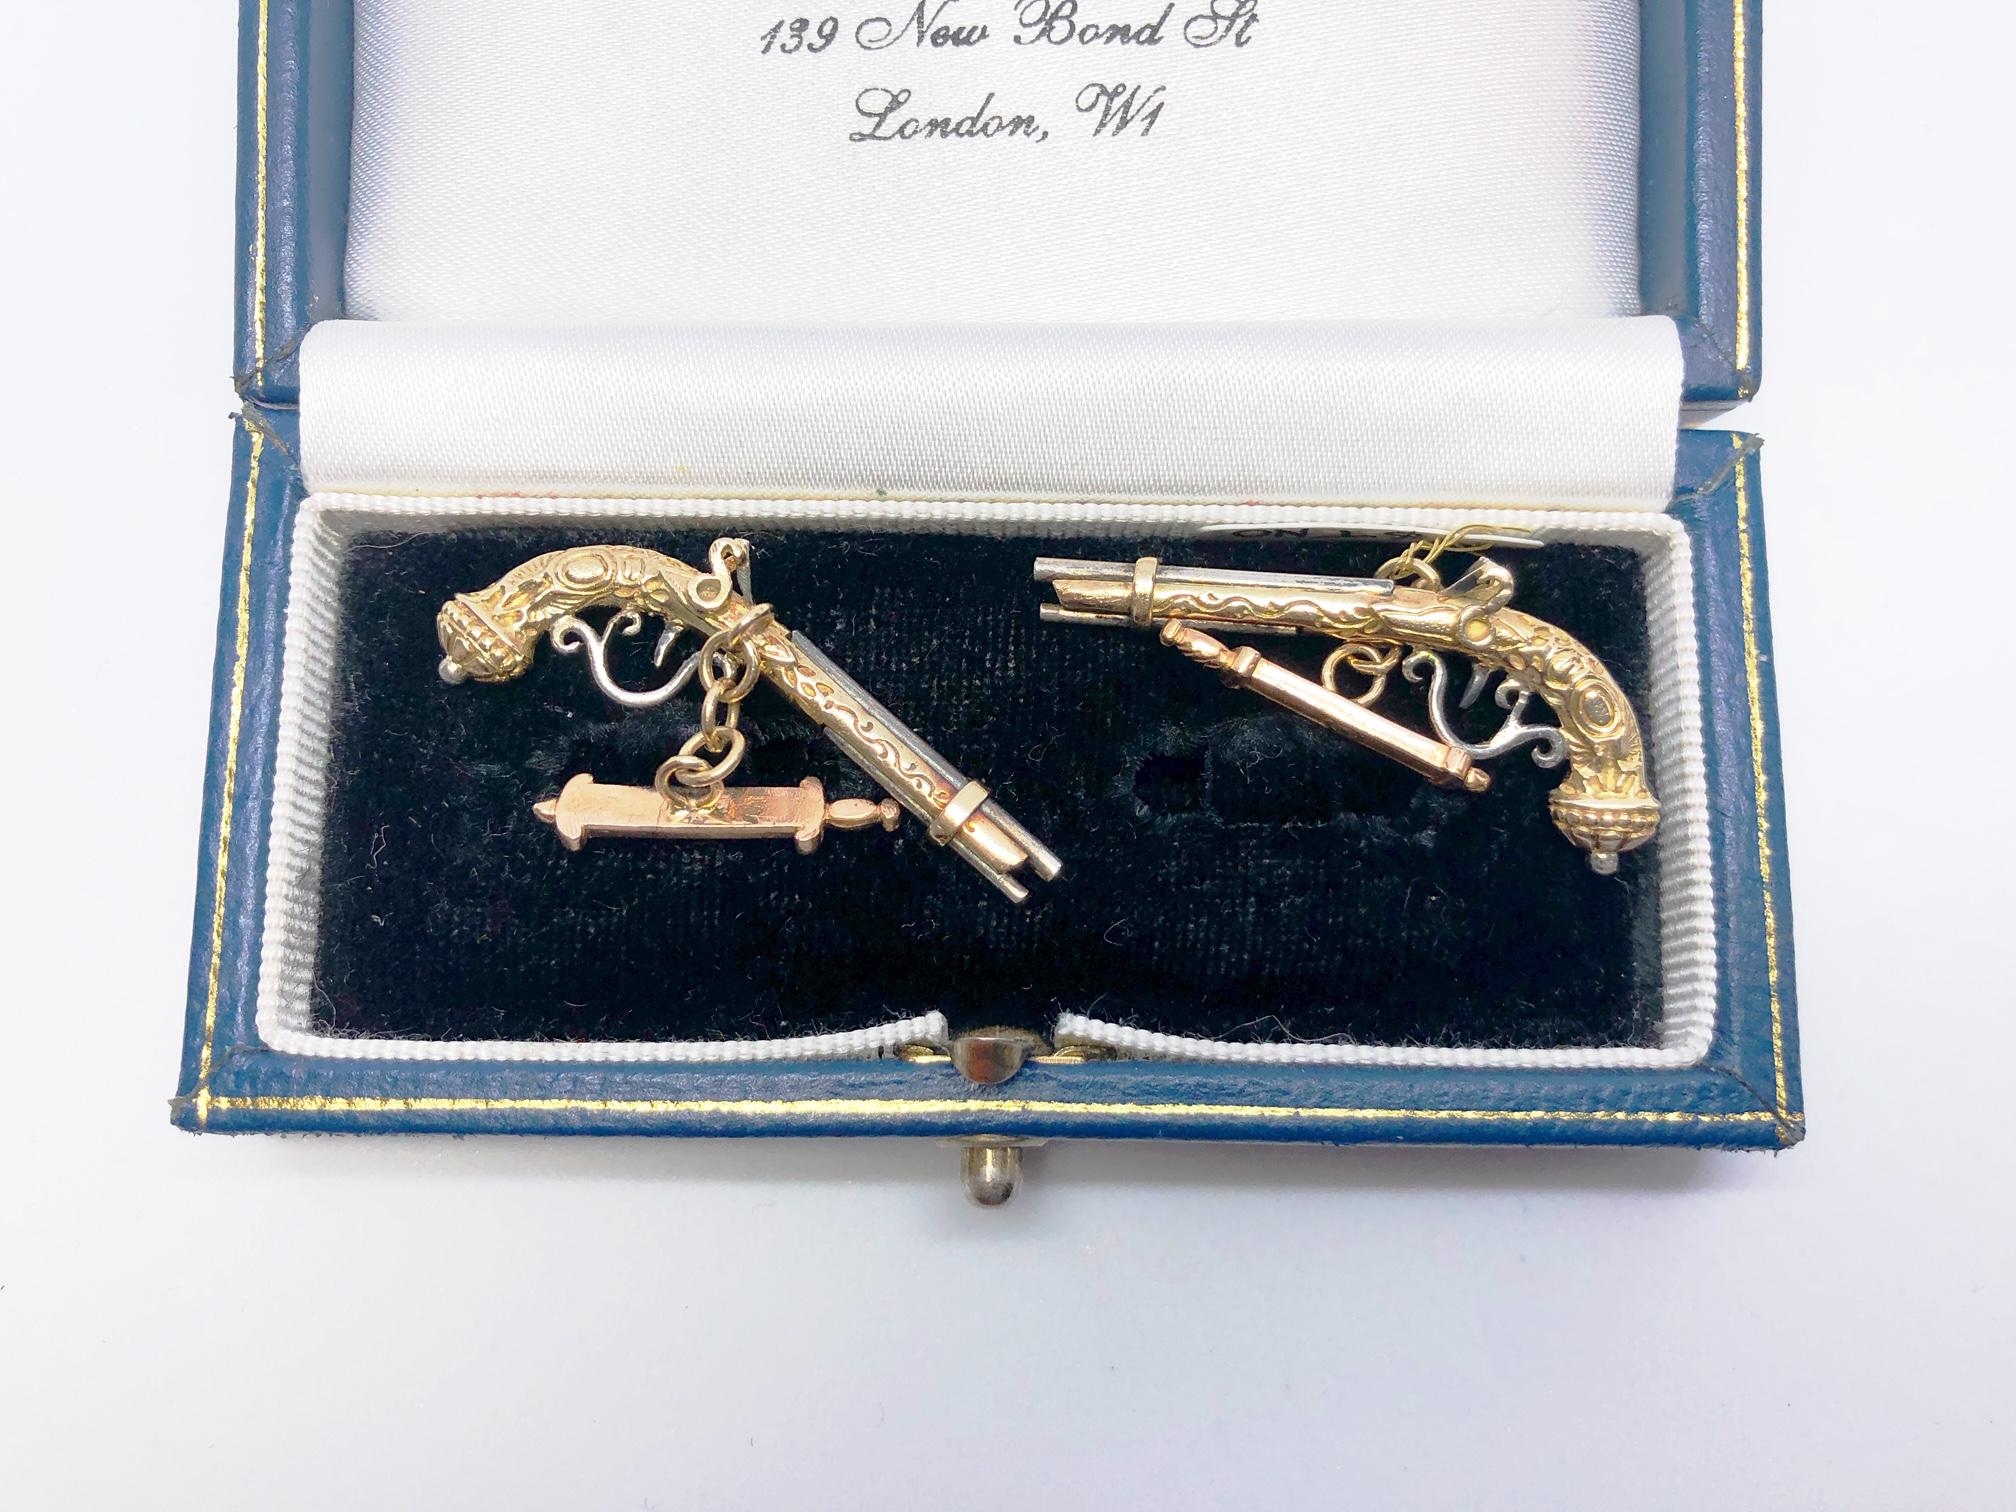 A pair of duelling pistol cufflinks, with engraved decorations, mounted in 14ct yellow and white gold, with chain link connection. Measures approximately 35 x 17.3 x 5mm.